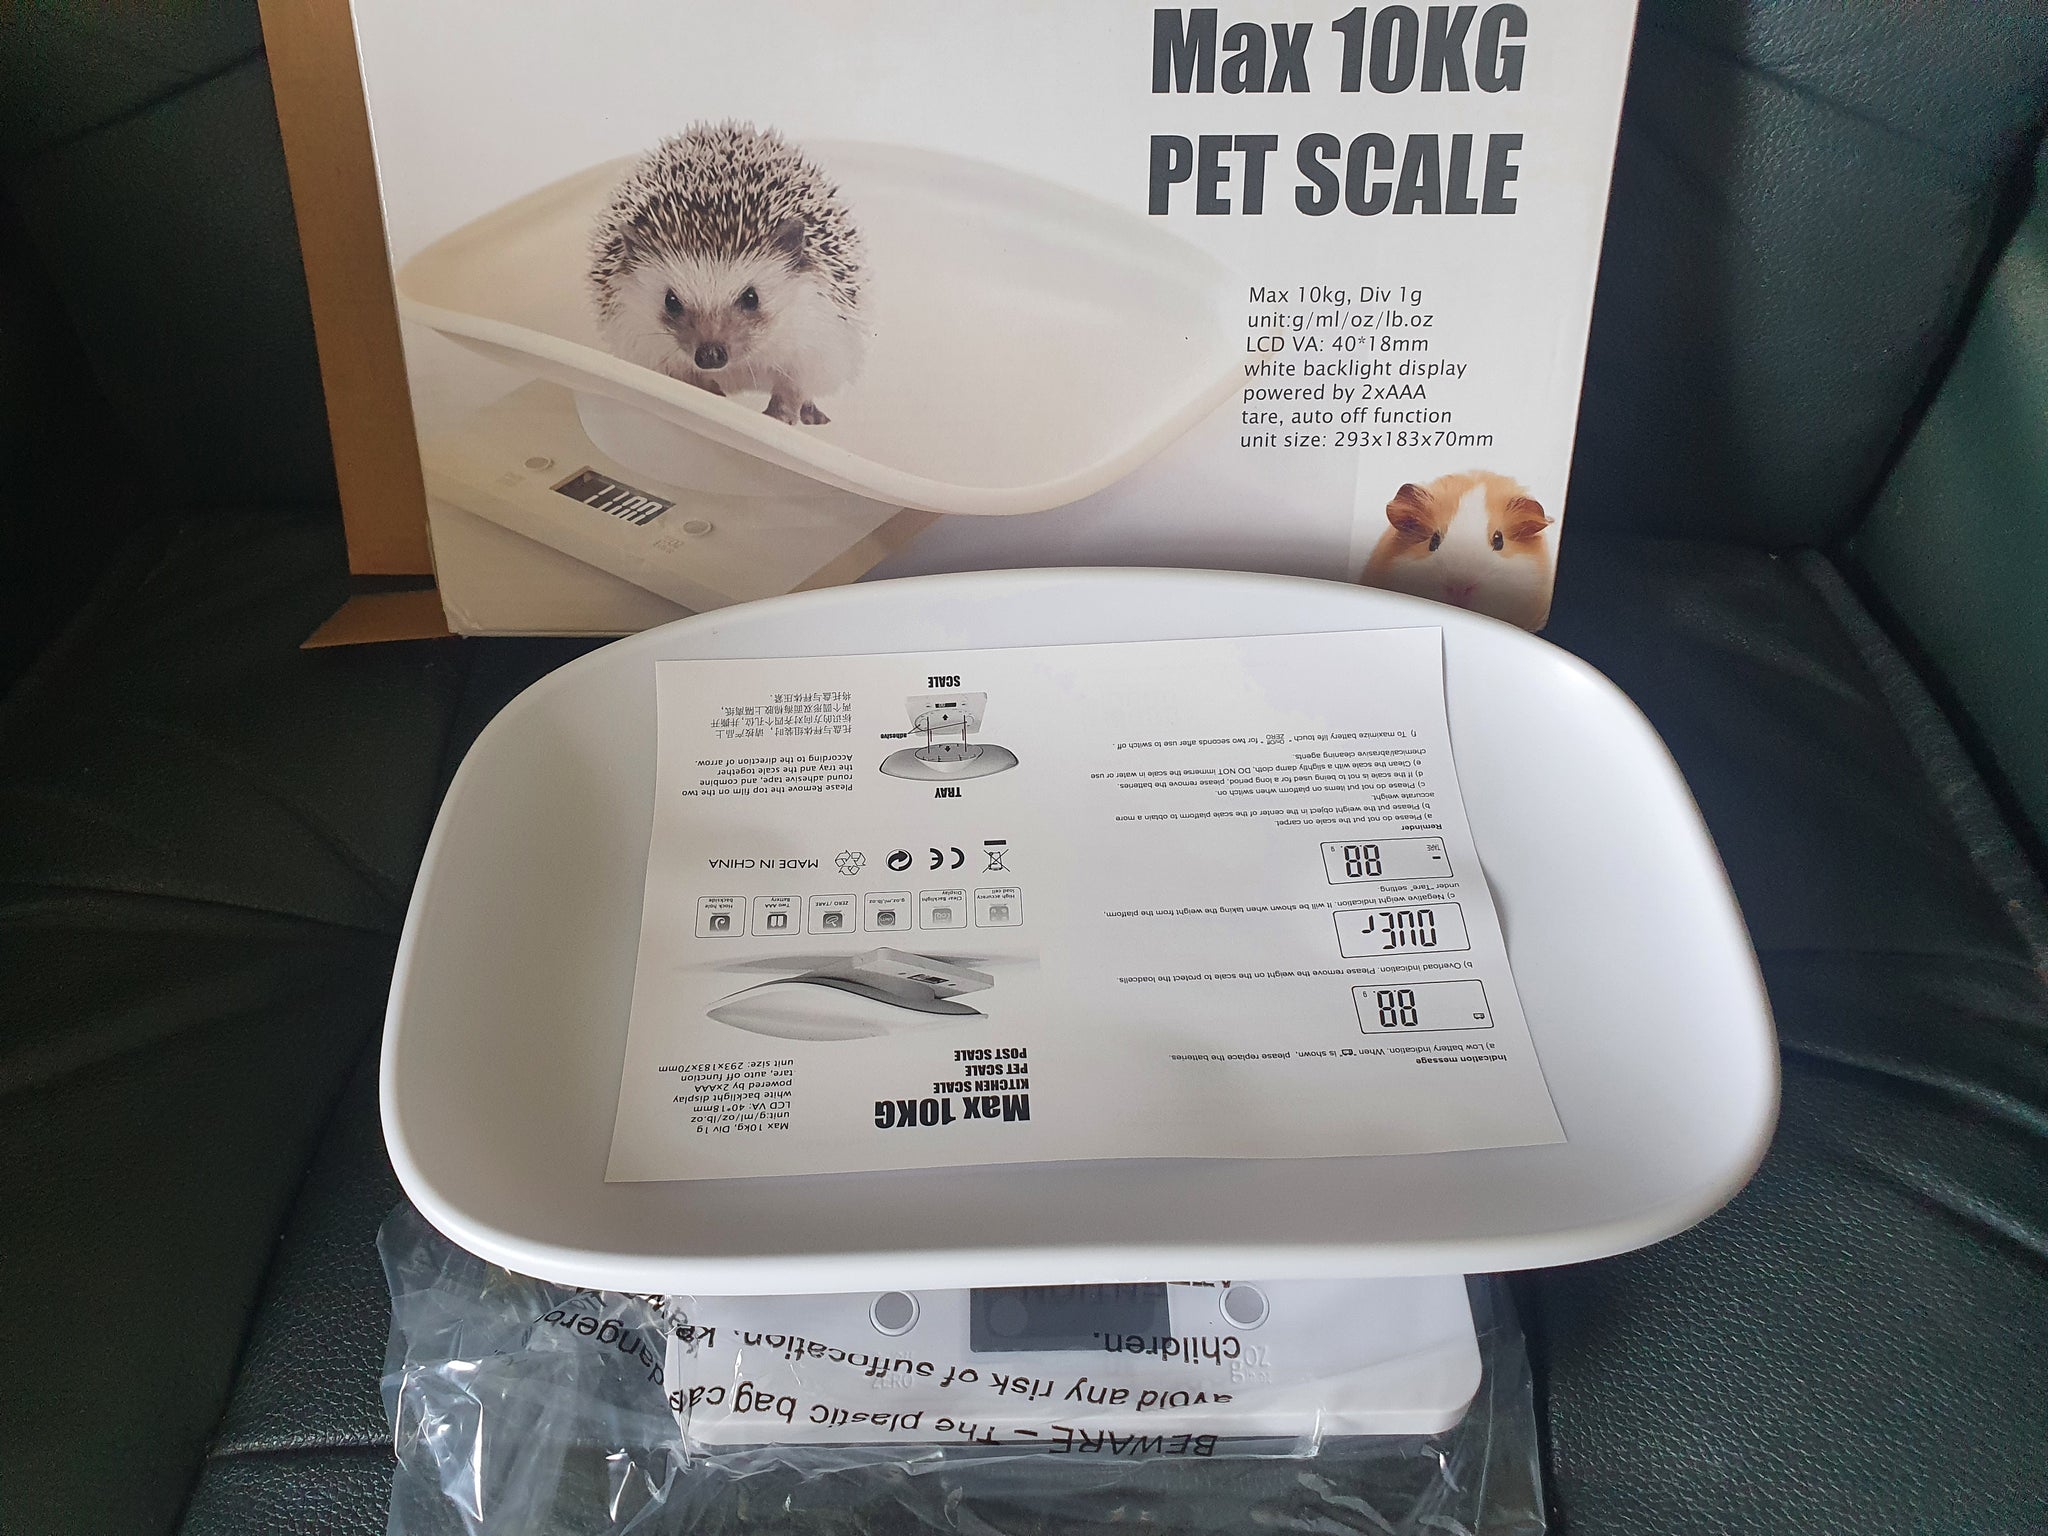 Digital , Small Animal Scale with Tray, LCD Electronic Scale ,High  Precision Food Scale for Measuring Hamster/Hedgehog/Kitten 